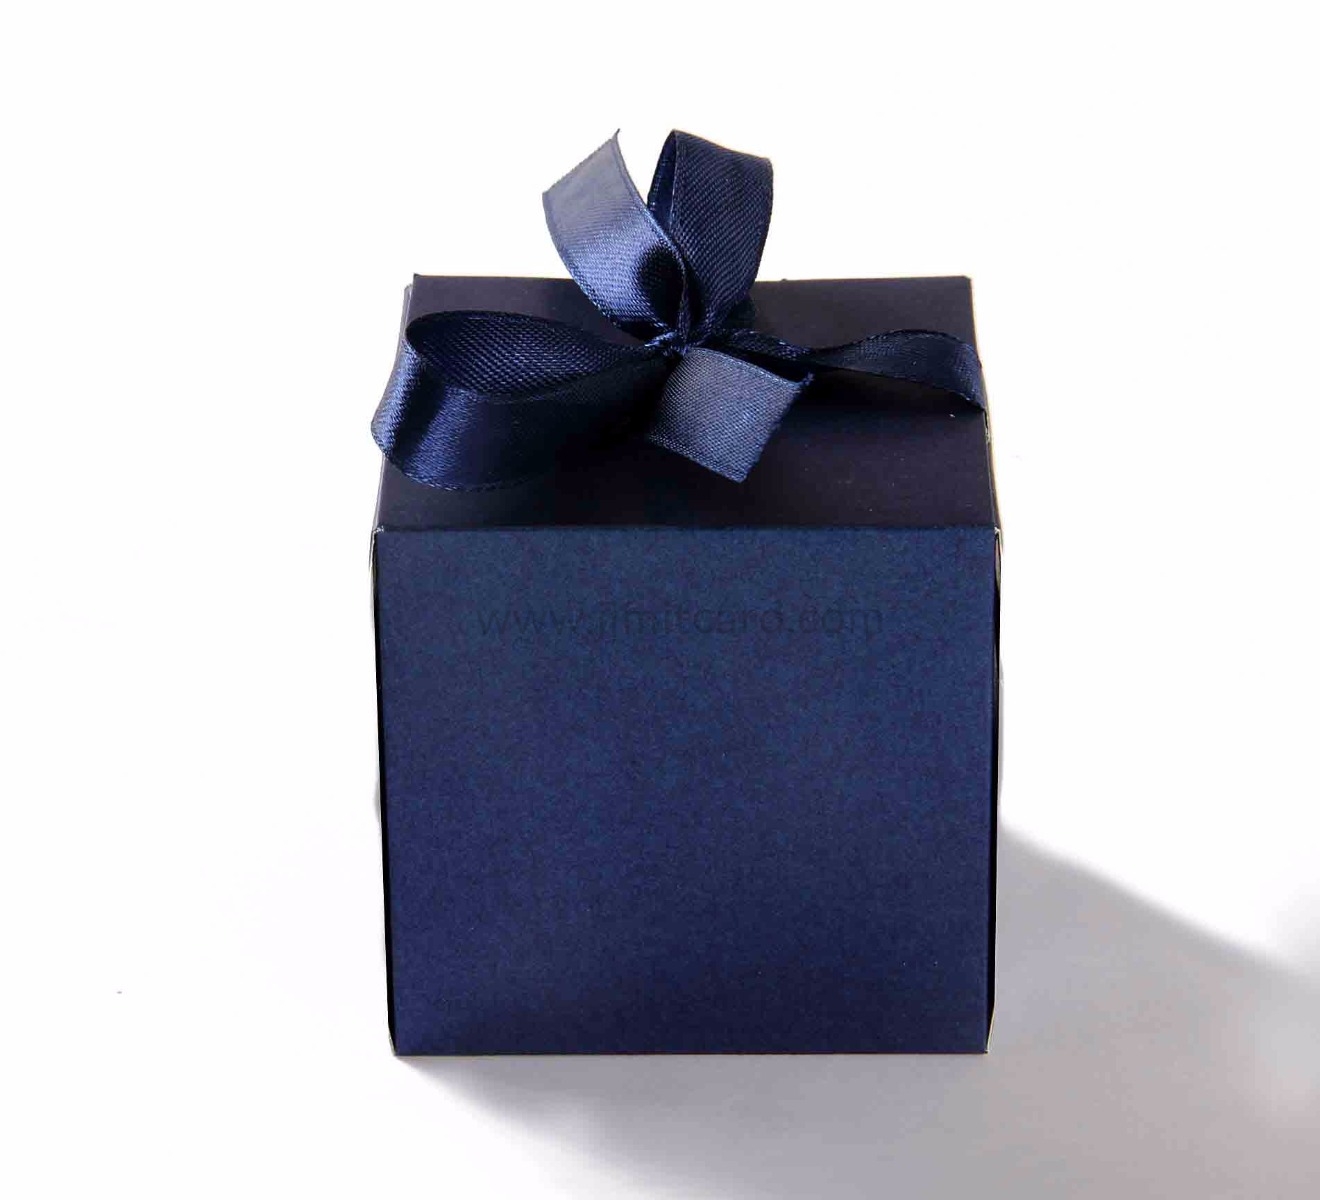 Bow Top Cube Favor Box in Royal Blue Color